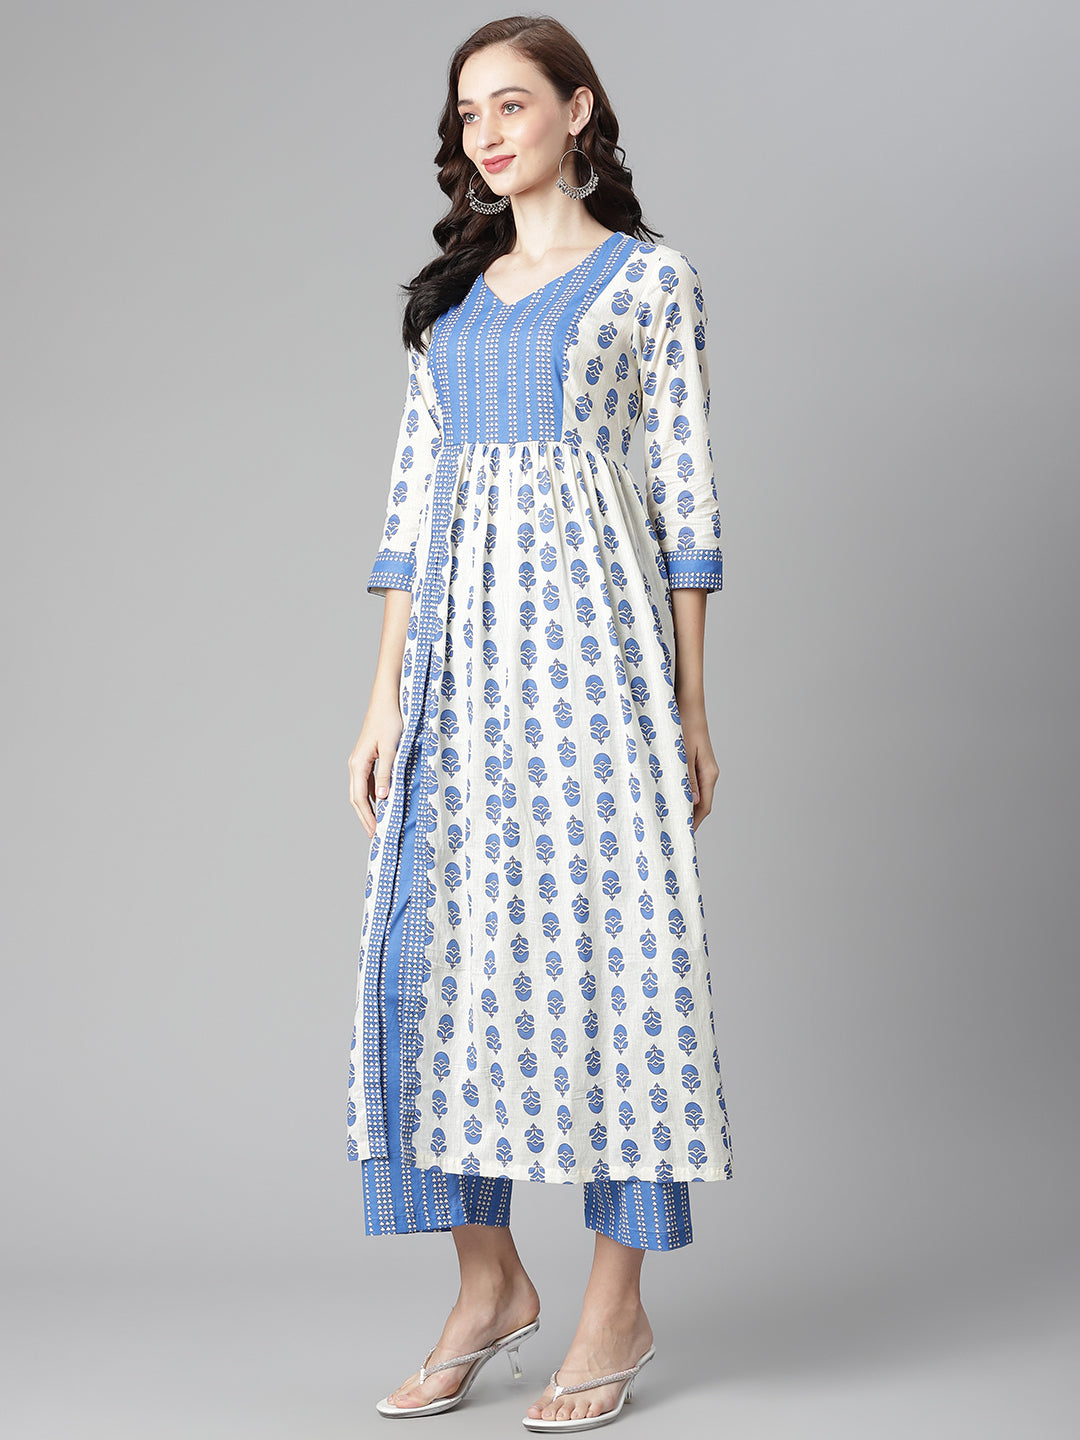 Women's Off-White-Blue Cotton Printed Front Slit A-Line Kurta With Palazzo - Noz2Toz